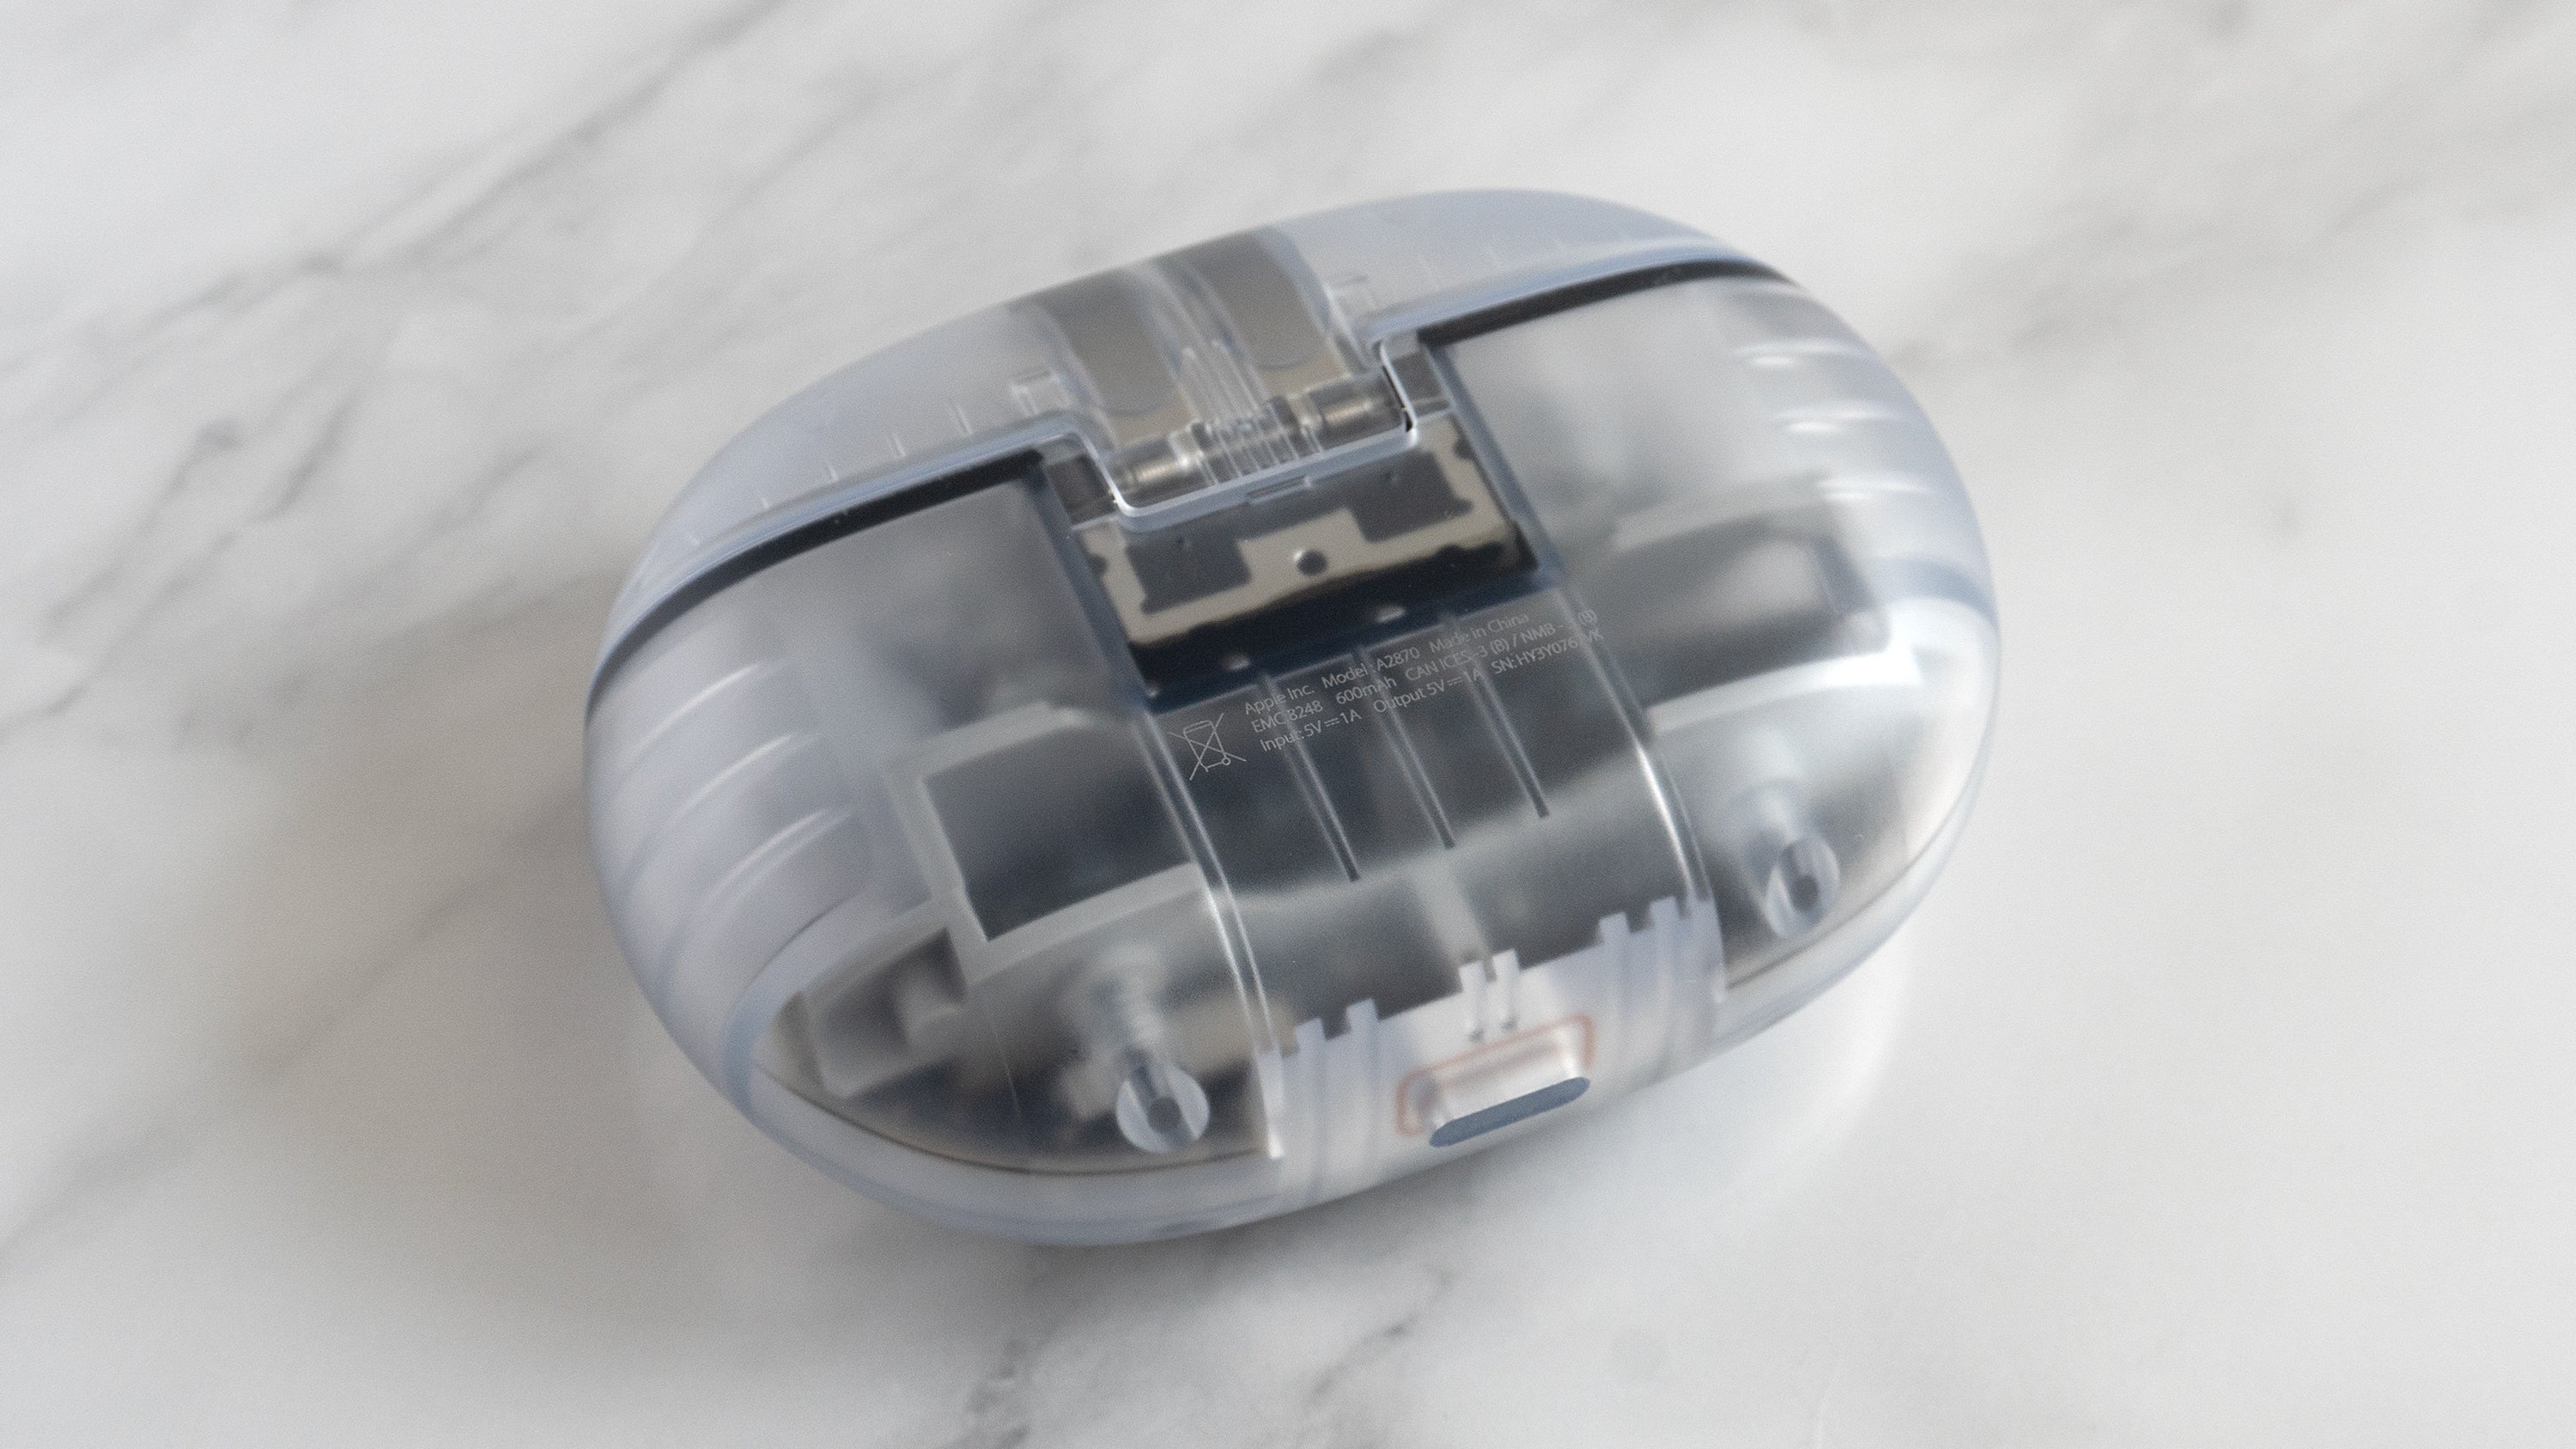 The Beats Studio Buds + charging case with its transparent housing might give airport FAA agents the wrong idea about what it is. (Photo: Andrew Liszewski | Gizmodo)